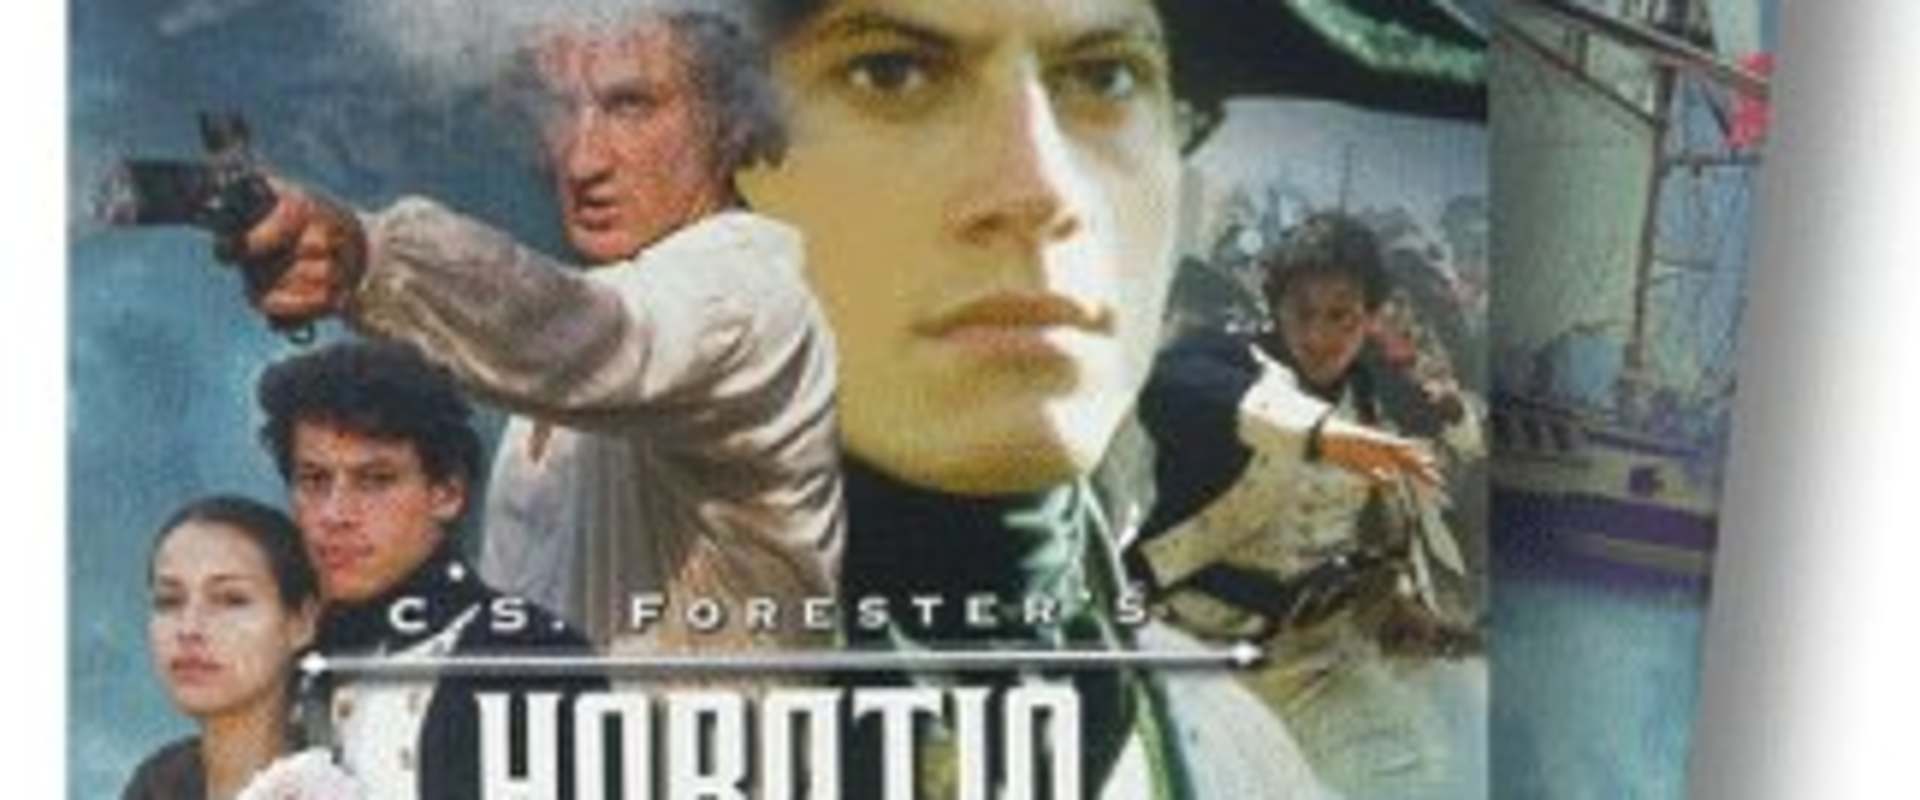 Horatio Hornblower: The Duel background 2